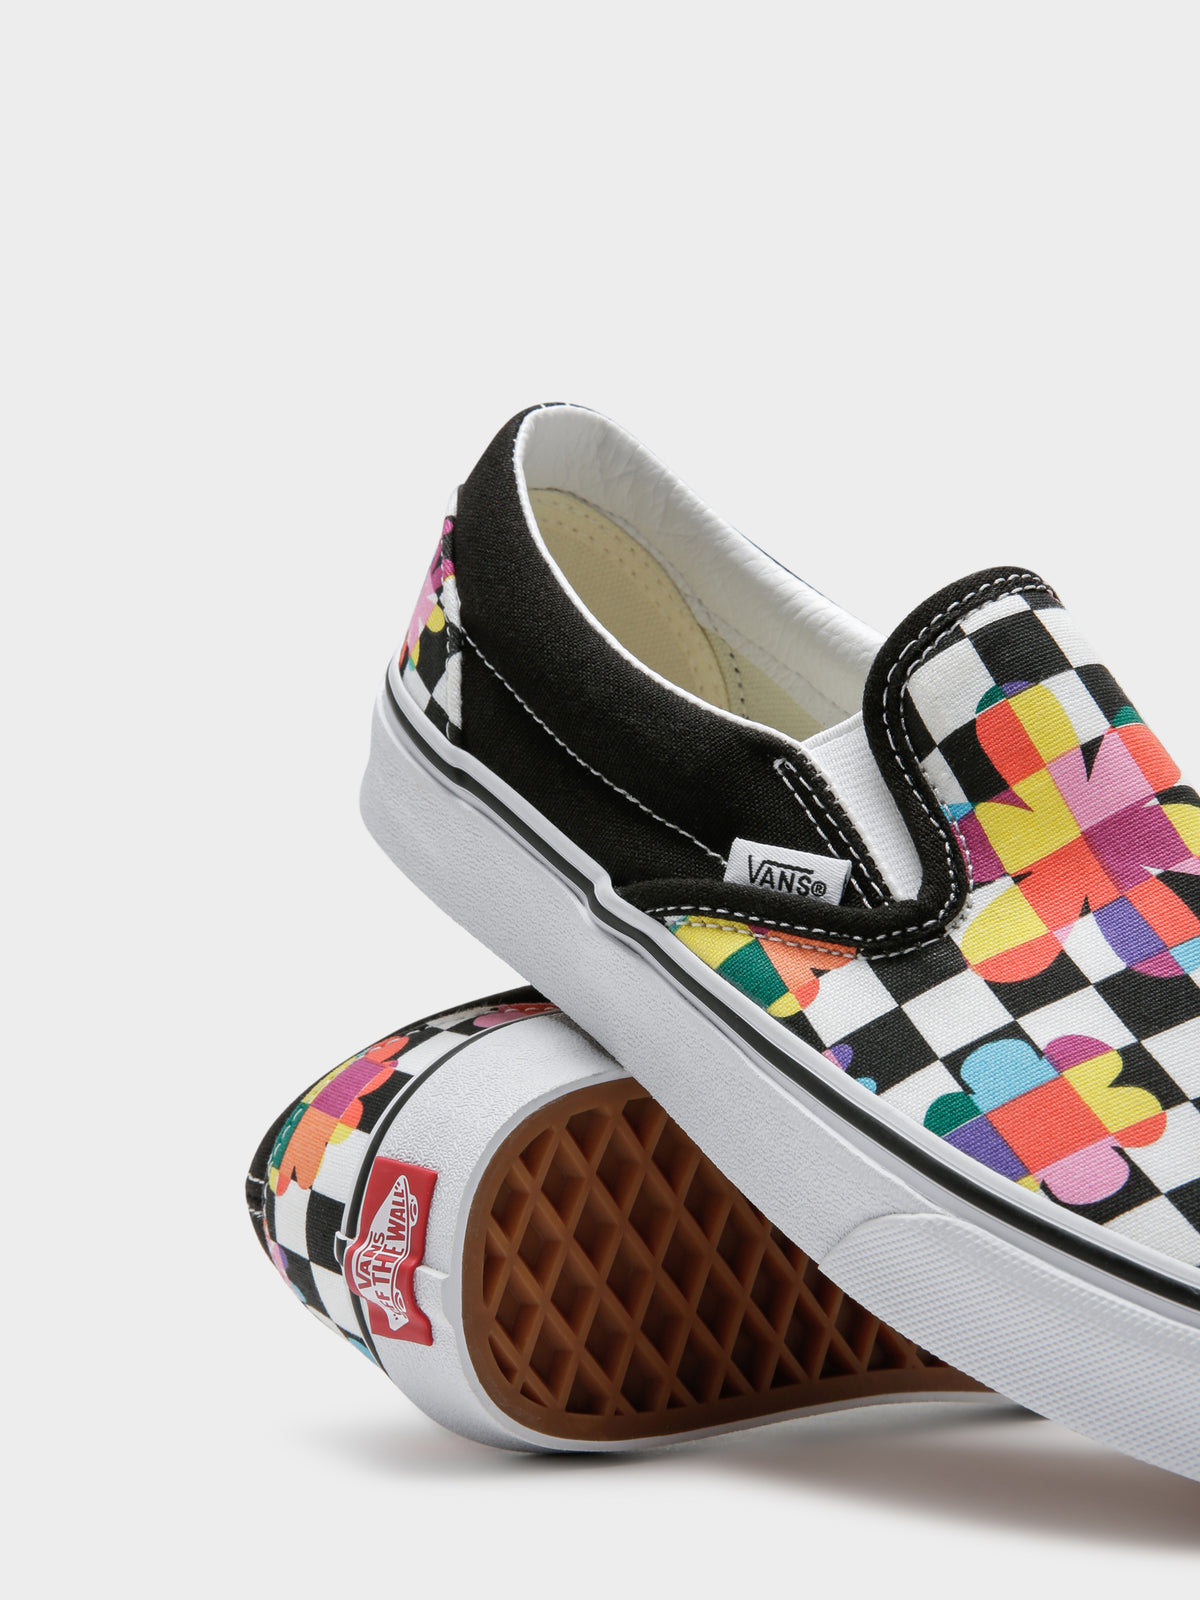 Unisex Classic Slip On sneakers in Floral Checkerboard